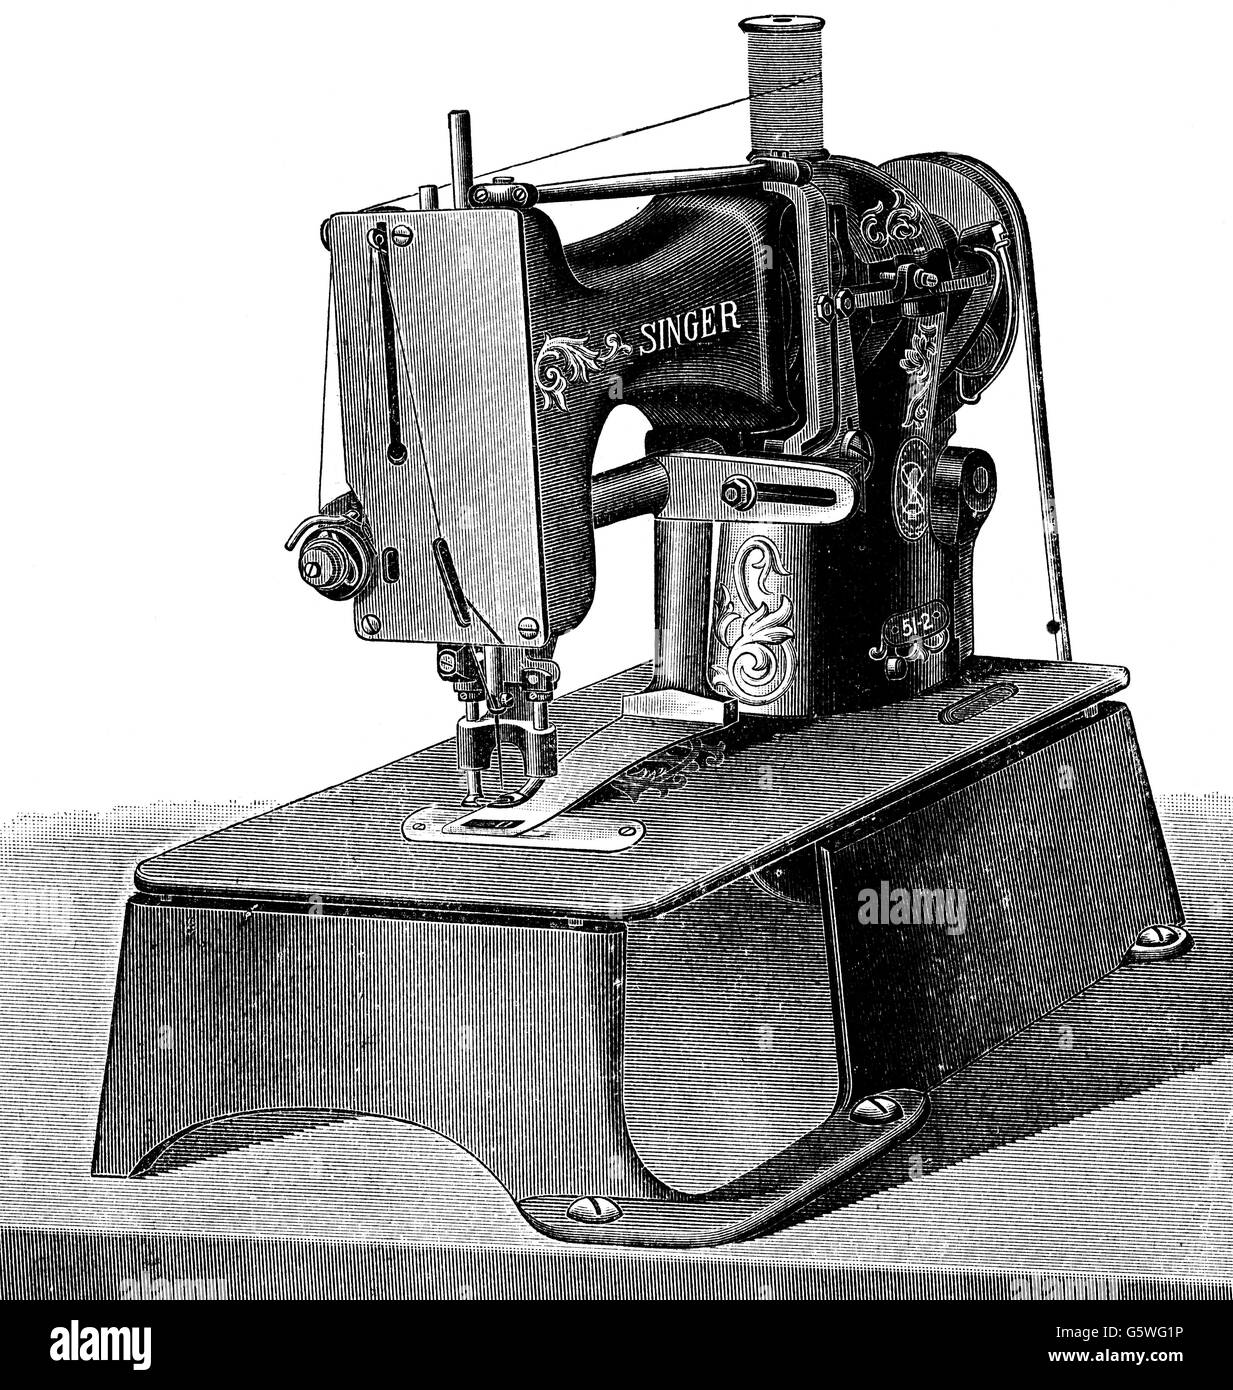 Pedal Foot Singer Sewing Machine' Photographic Print